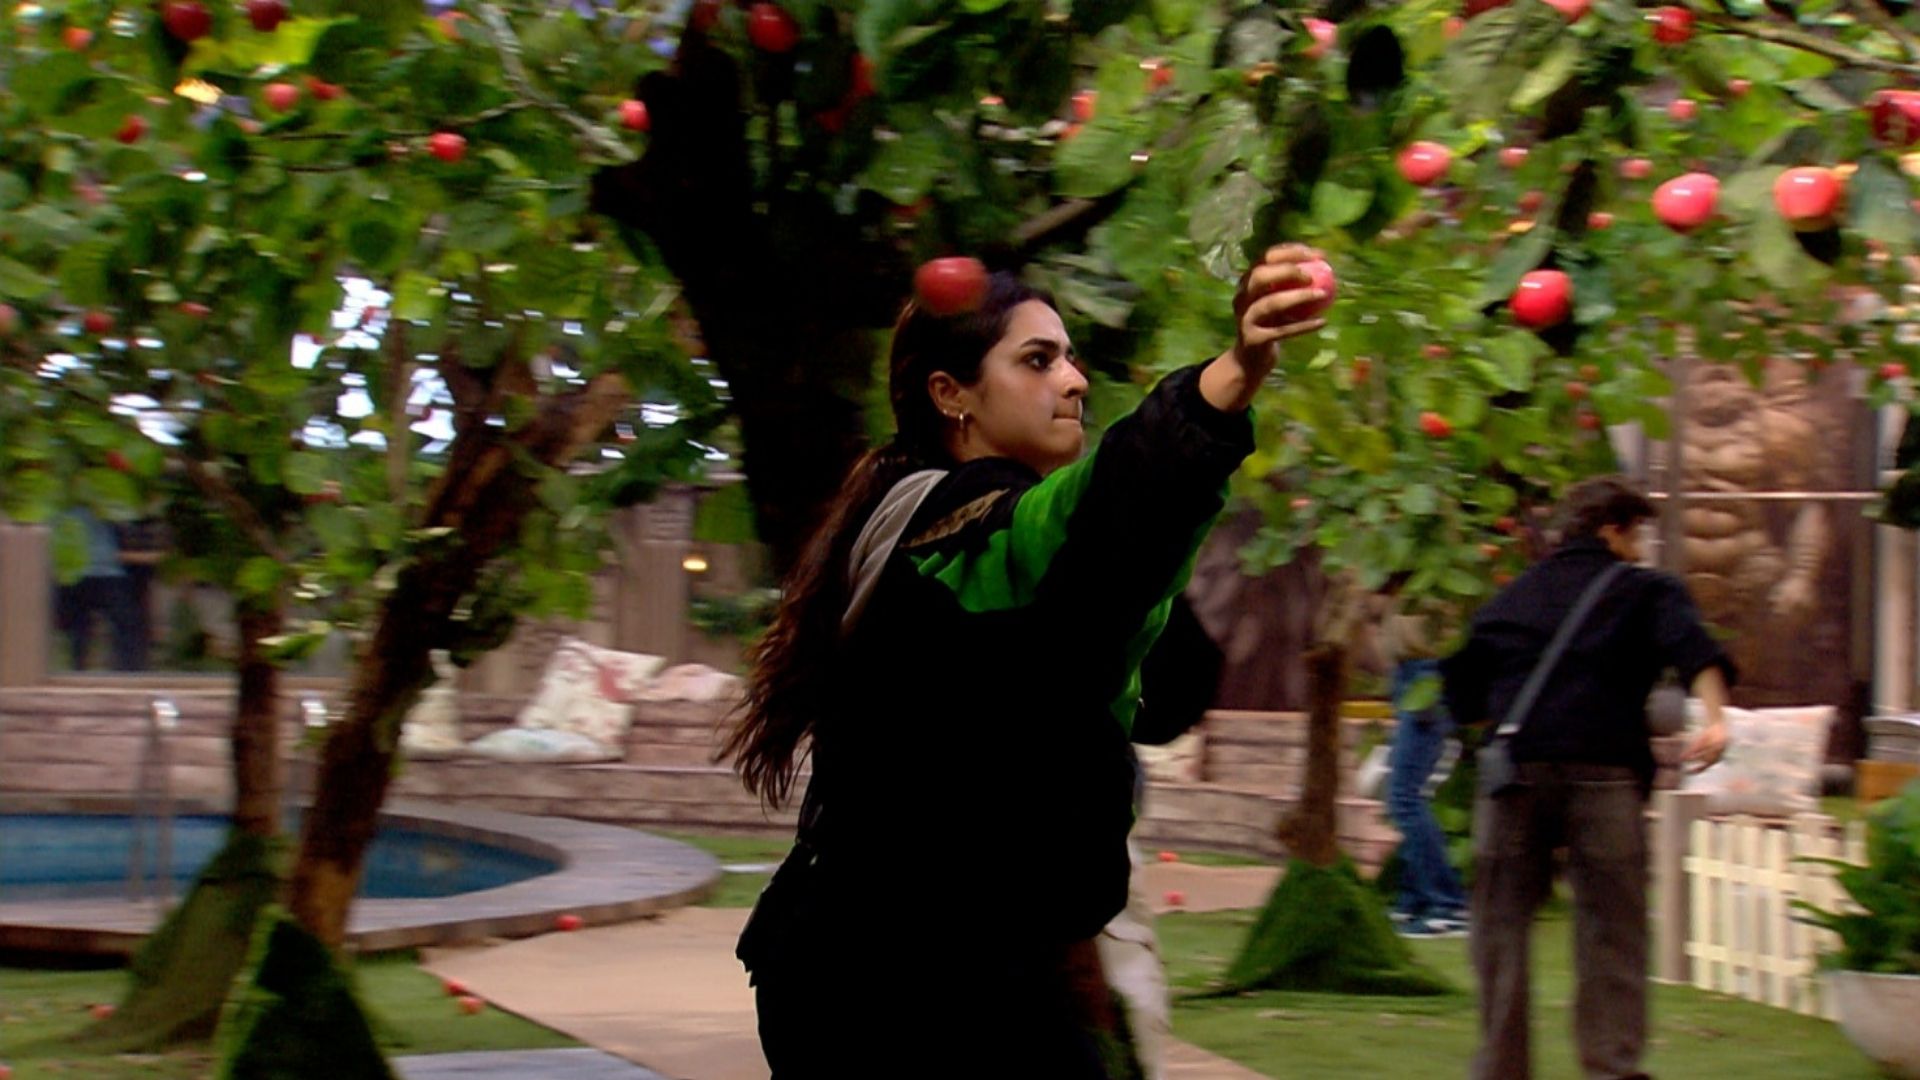 In the latest episode of COLORS BIGG BOSS sparks fly as wild card entrant Ayesha Khan and comedian Munawar Faruqui share flirtatious moments, setting the house abuzz with speculation. Amidst the brewing relationship drama, the quest for captaincy adds a thrilling twist, pitting housemates against each other in a heated apple-picking task.Unveiling Munawar and Ayesha Chemistry
Delve into the intriguing dynamics between Munawar Faruqui and Ayesha Khan, exploring how their relationship went from heartbreak to unmistakable chemistry. Housemates share varied opinions, with Aishwarya Sharma suspecting strategic gameplay from Ayesha's side. The plot thickens as Isha Malviya hints at Munawar's growing attraction.

Captaincy Ambitions and Teams Revealed
Highlight the captaincy task that divides the house into two competitive teams. Introduce the members and touch upon the tension as they vie for the prestigious role. The stakes are high as the captains of the makeshift apple orchard, Munawar Faruqui and Ankita Lokhande, hold the power to approve or reject the packed apple boxes.

Clash of Teams and Task Controversies
Dive into the chaos as both teams race against time, accompanied by the beats of Chikni Chameli. Explore the allegations of unfairness and the heated exchanges over task rules. Uncover the drama that unfolds in the quest for victory, leaving viewers on the edge of their seats.

The Climax: Who Emerges Victorious?
Build suspense as the blog approaches its climax. Analyze the events leading up to the final decision, keeping readers hooked on the question of which team will emerge victorious. Tease the revelation of the captain of the house for the week.

Conclusion:
Wrap up the blog with a thrilling conclusion, summarizing the episode's highlights. Leave readers eagerly anticipating the next 'BIGG BOSS' episode, wondering how the evolving relationships and strategic gameplay will shape the dynamics inside the house.